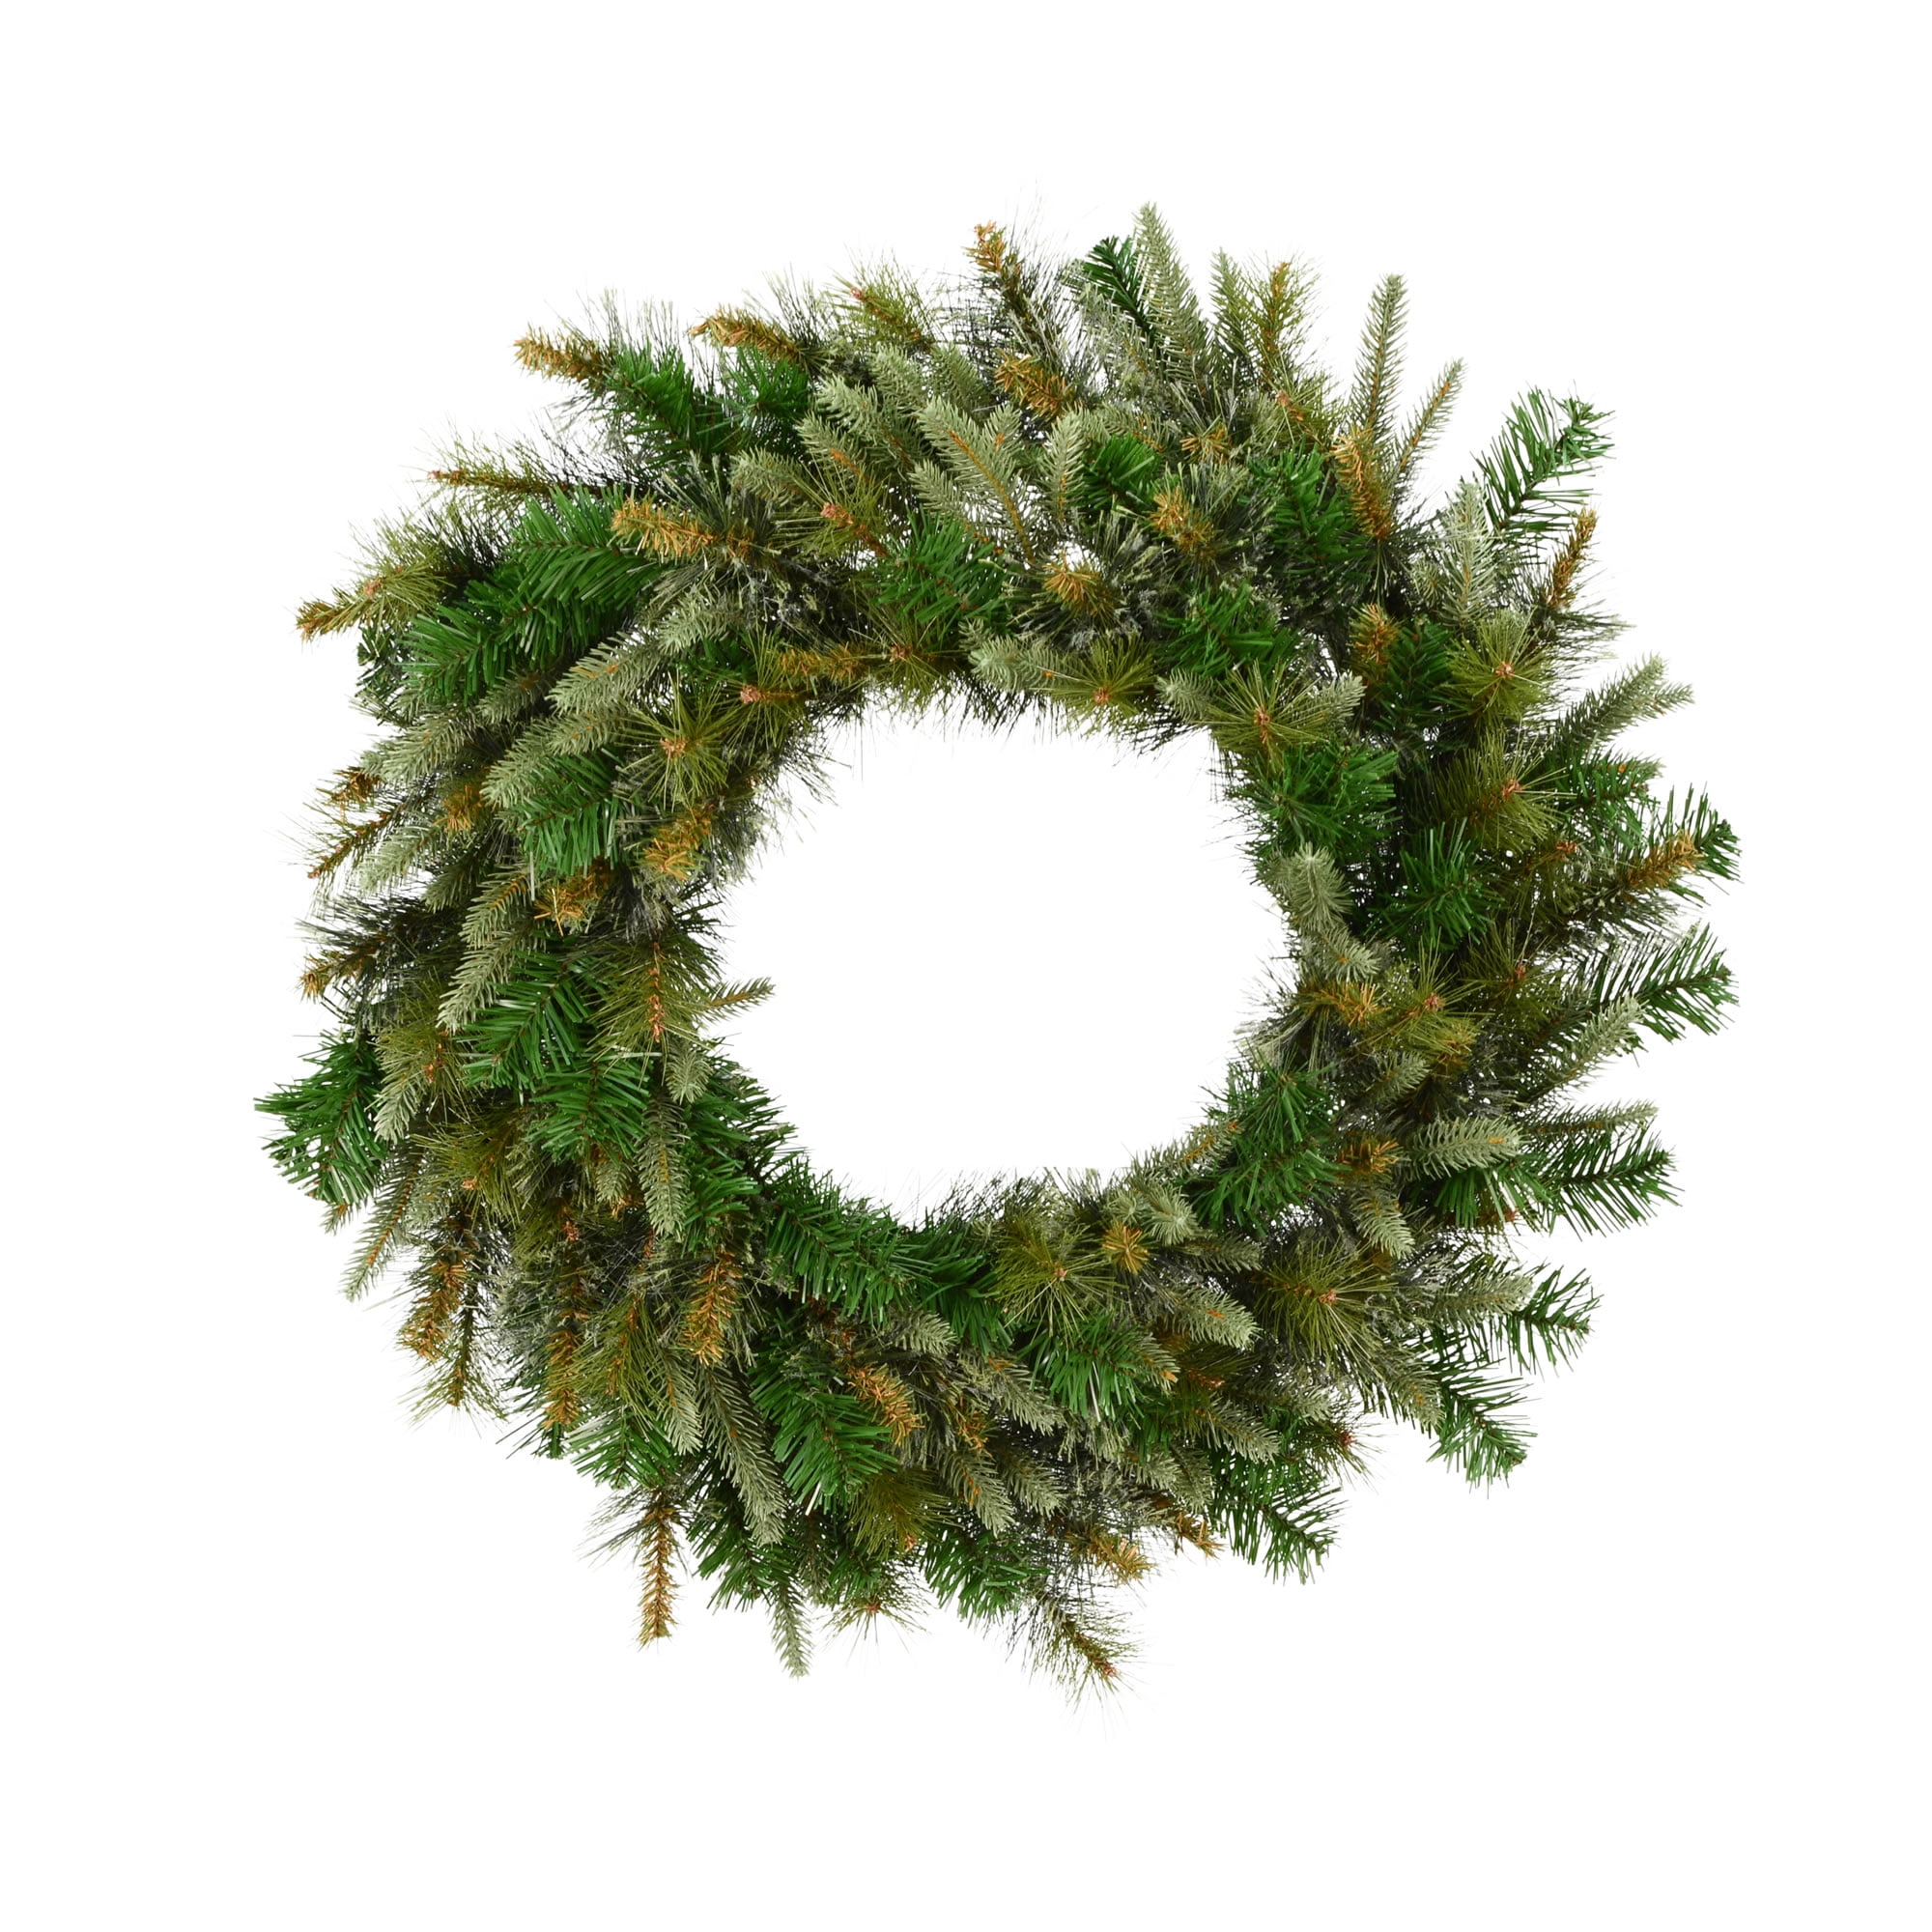 Details about   Vickerman 72" Canadian Pine Wreath 1440 Tips Case of 1 A802872 